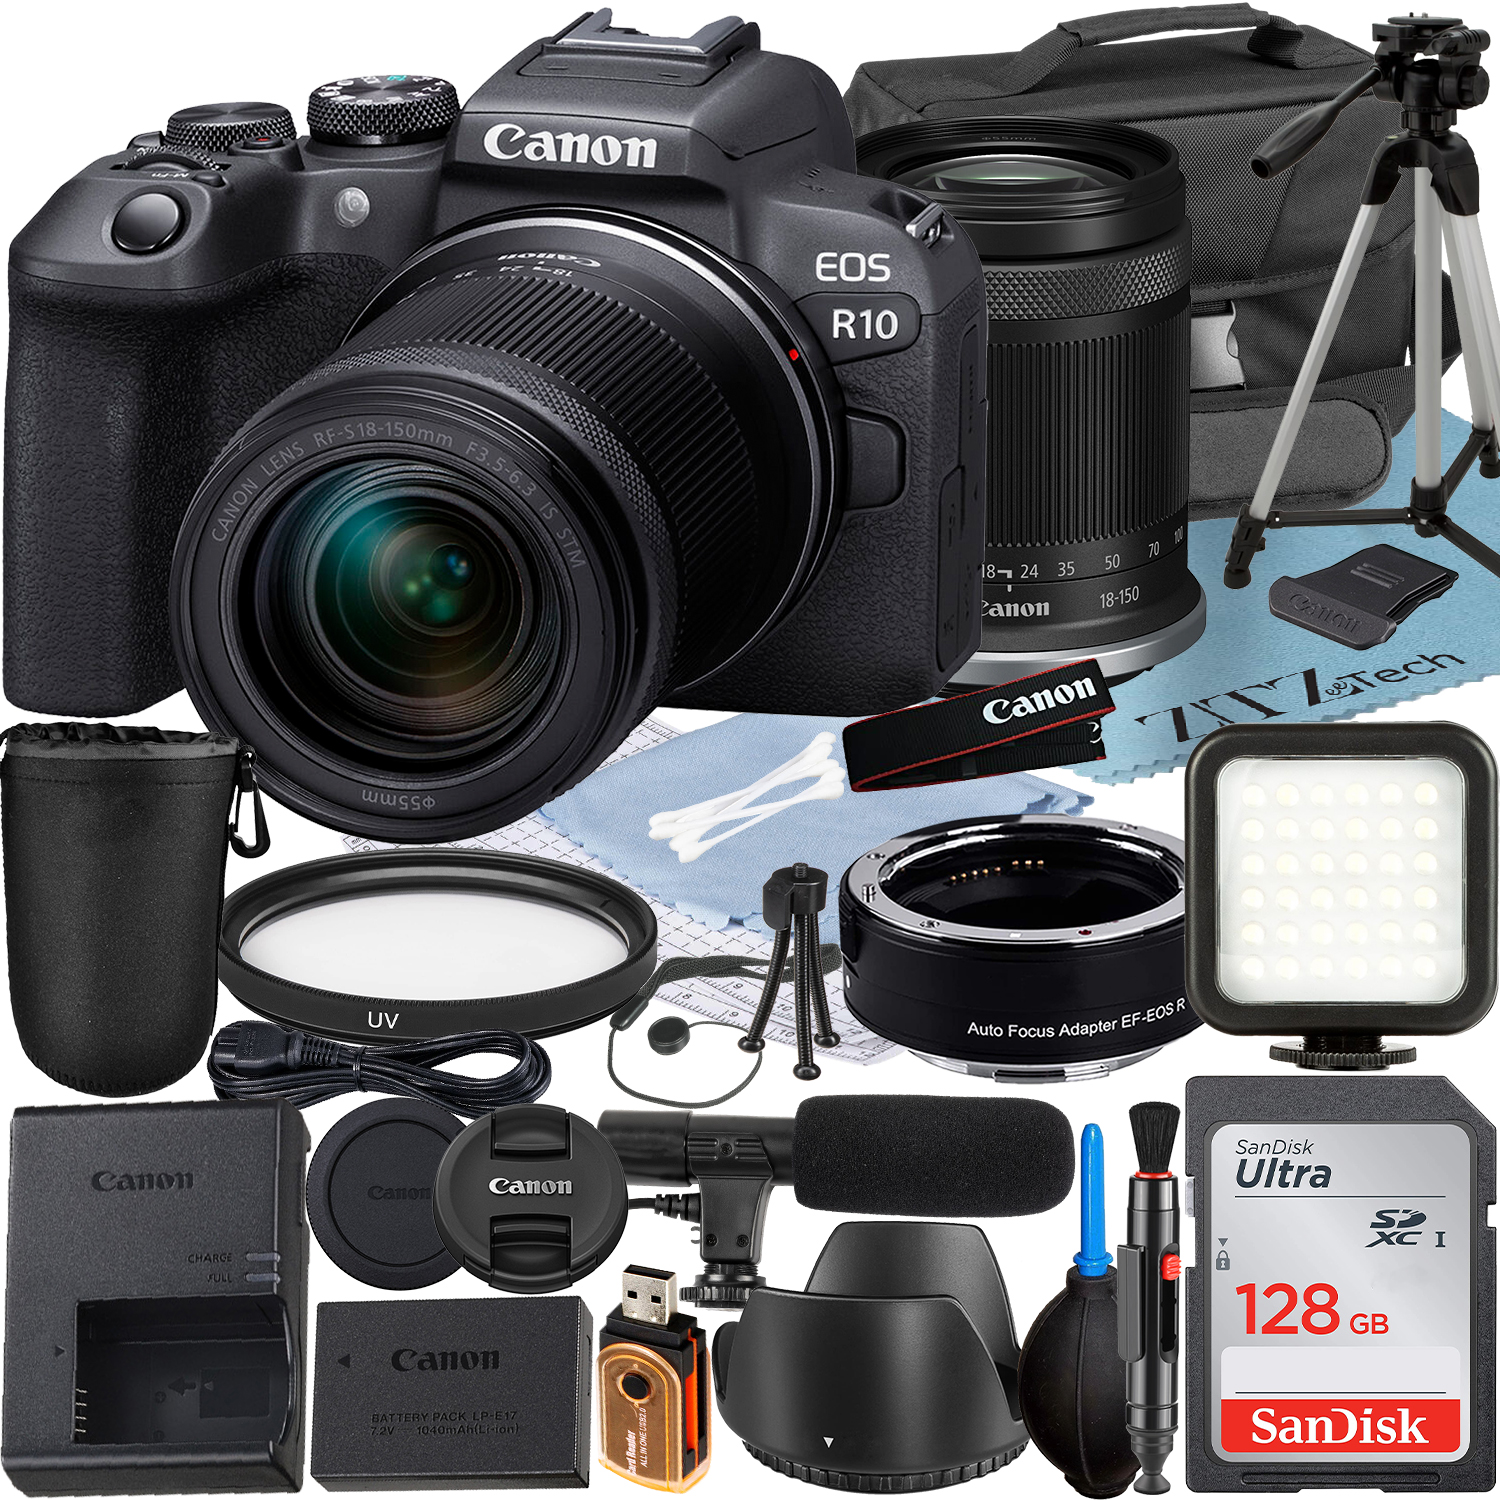 Canon EOS R10 Mirrorless Camera with RF-S 18-150mm Lens + Mount Adapter + SanDisk 128GB Memory Card + Case + LED Flash + ZeeTech Accessory Bundle